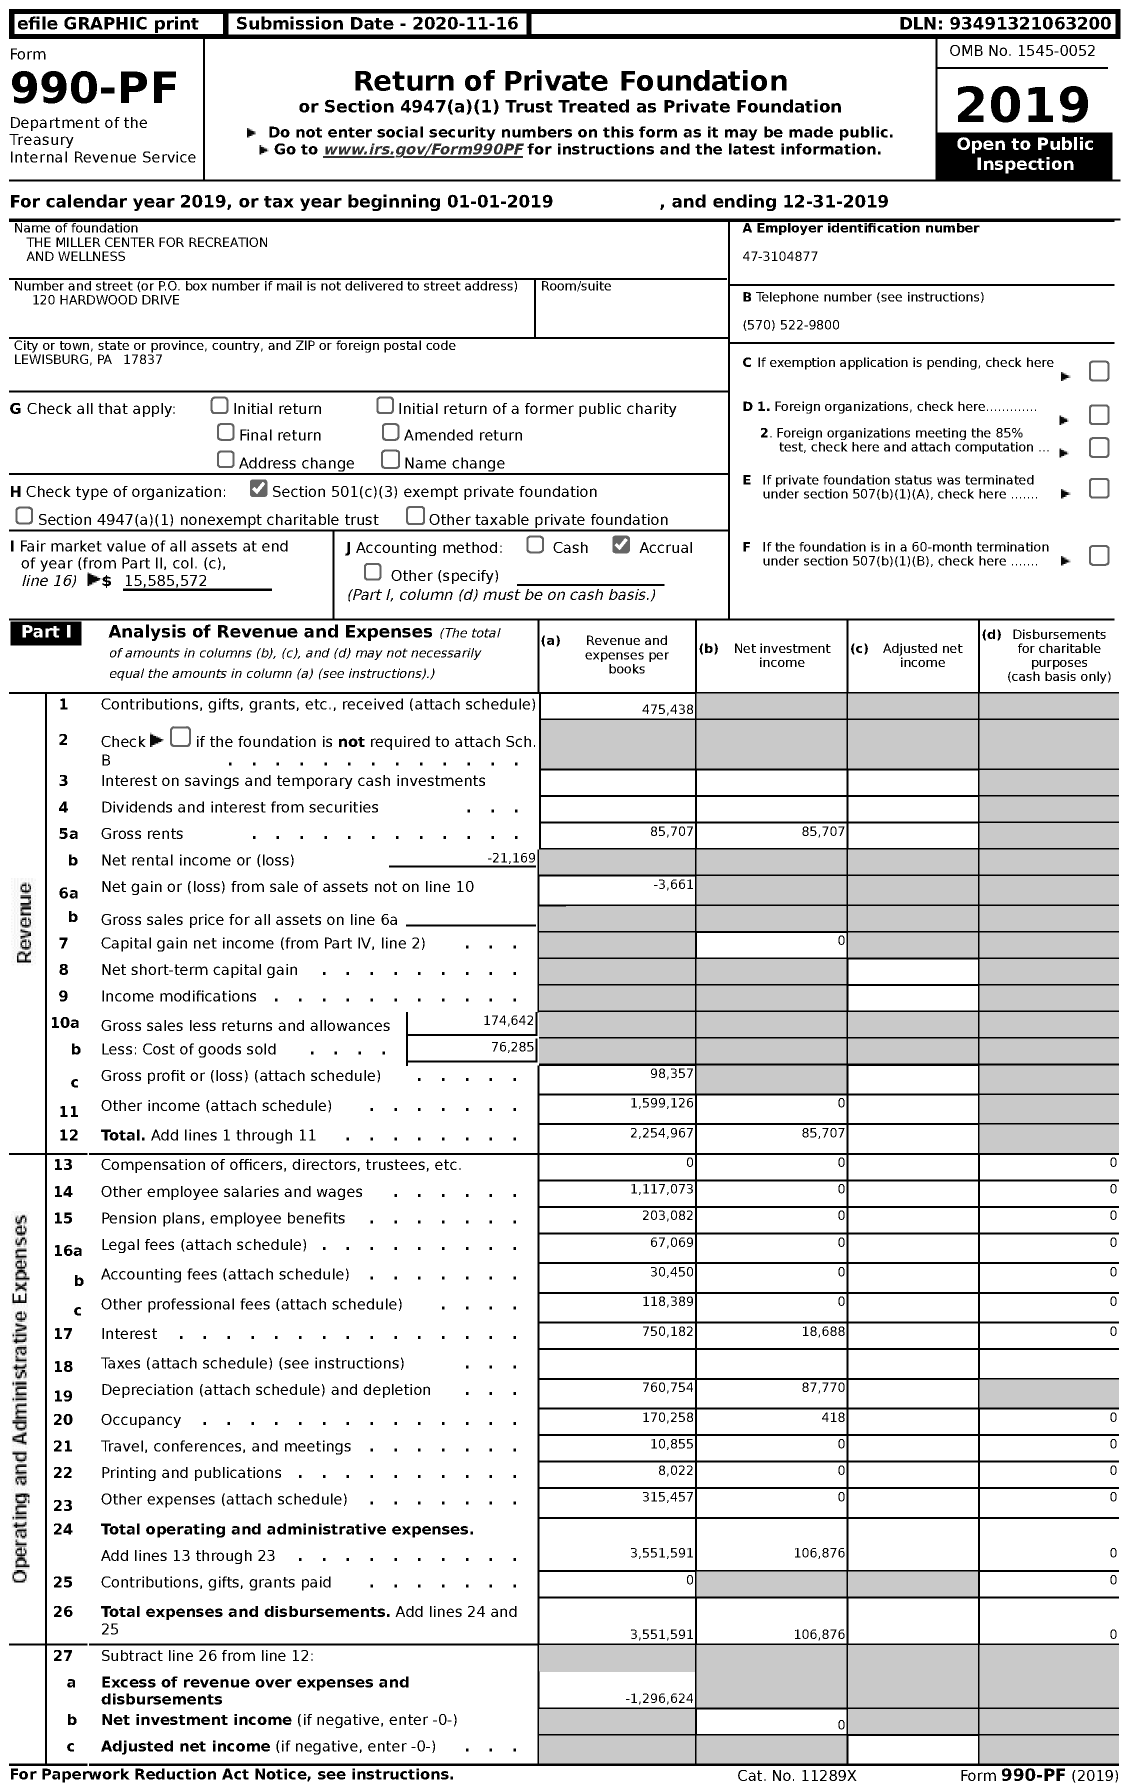 Image of first page of 2019 Form 990PF for The Miller Center for Recreation and Wellness